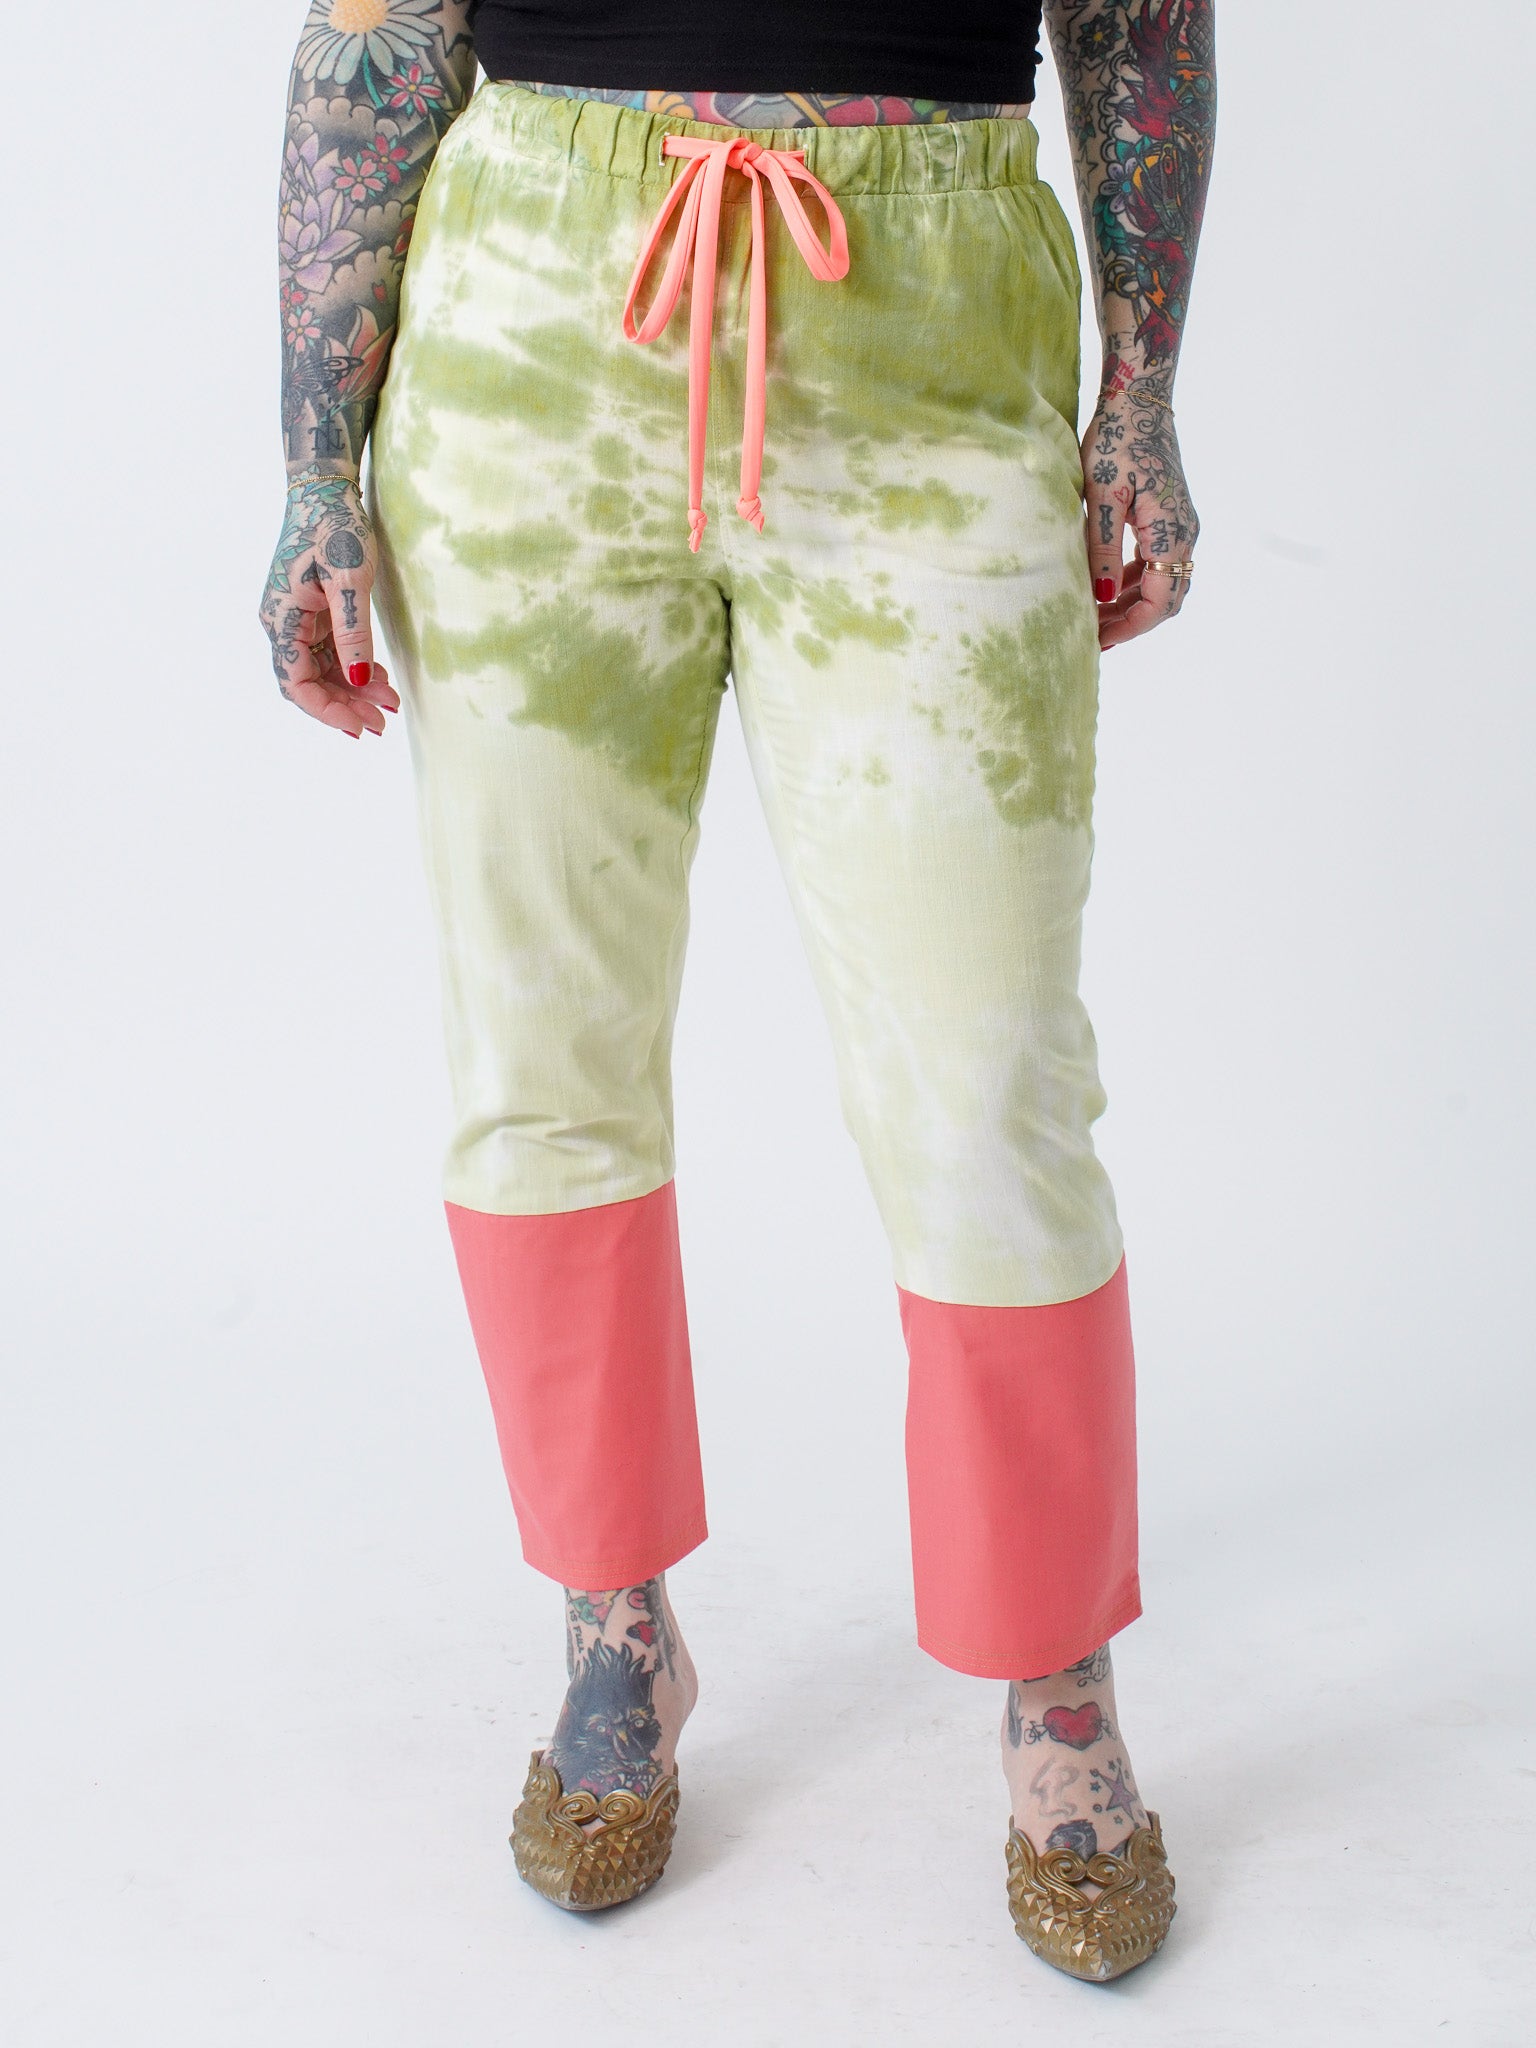 Syd Brisco - Upcycled Tie Dye Trousers